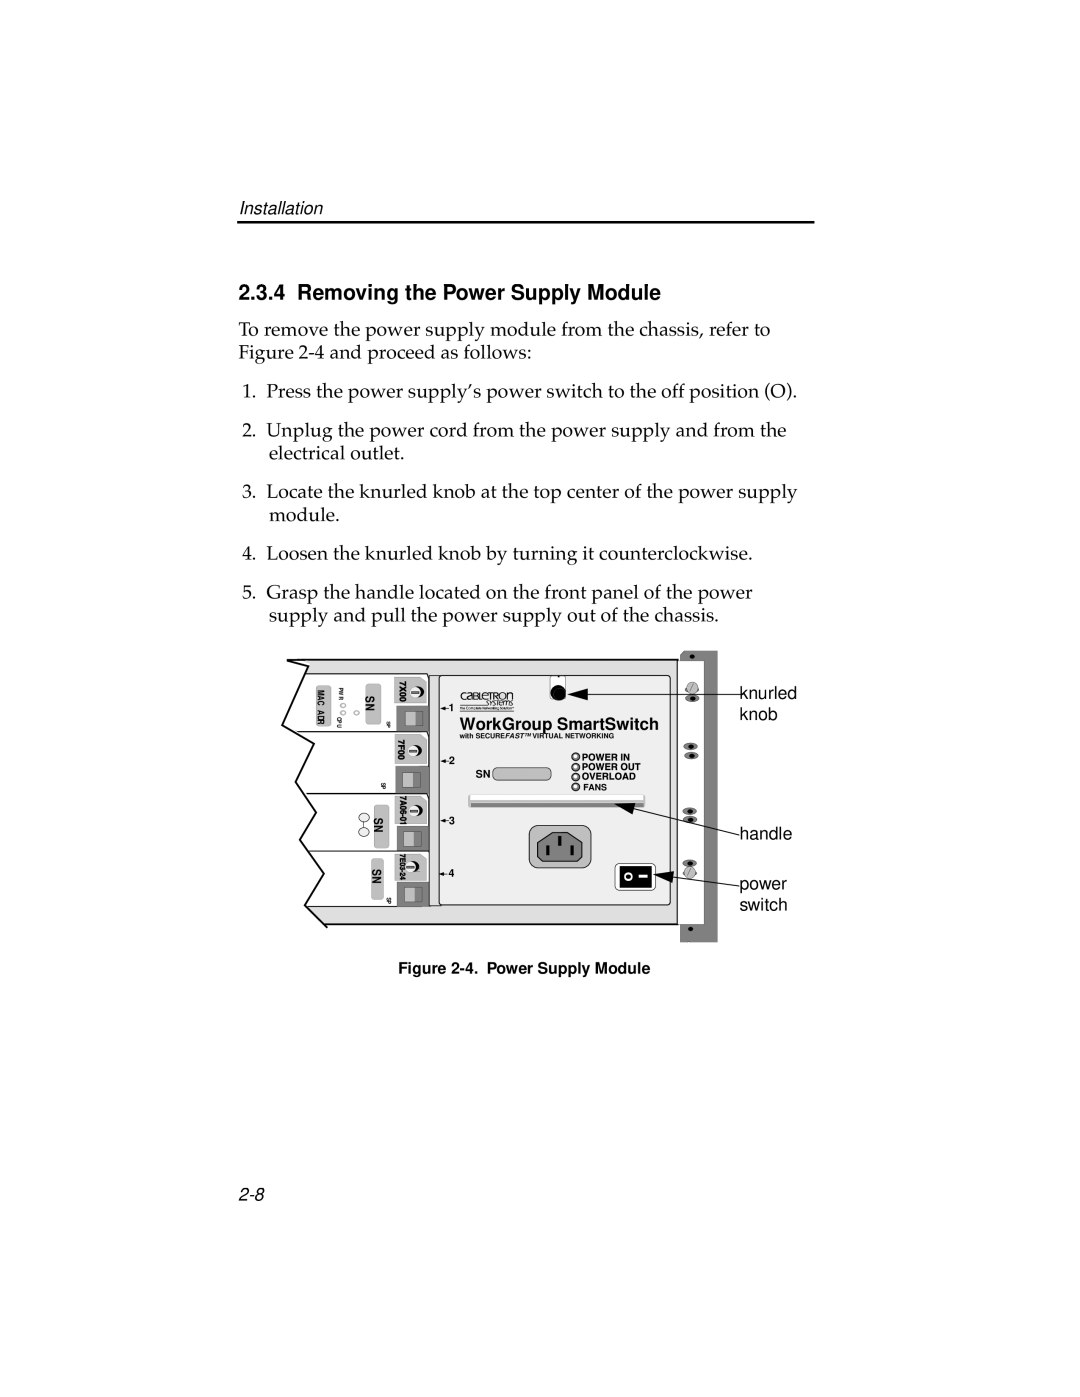 Cabletron Systems 7C04 Workgroup manual Removing the Power Supply Module 